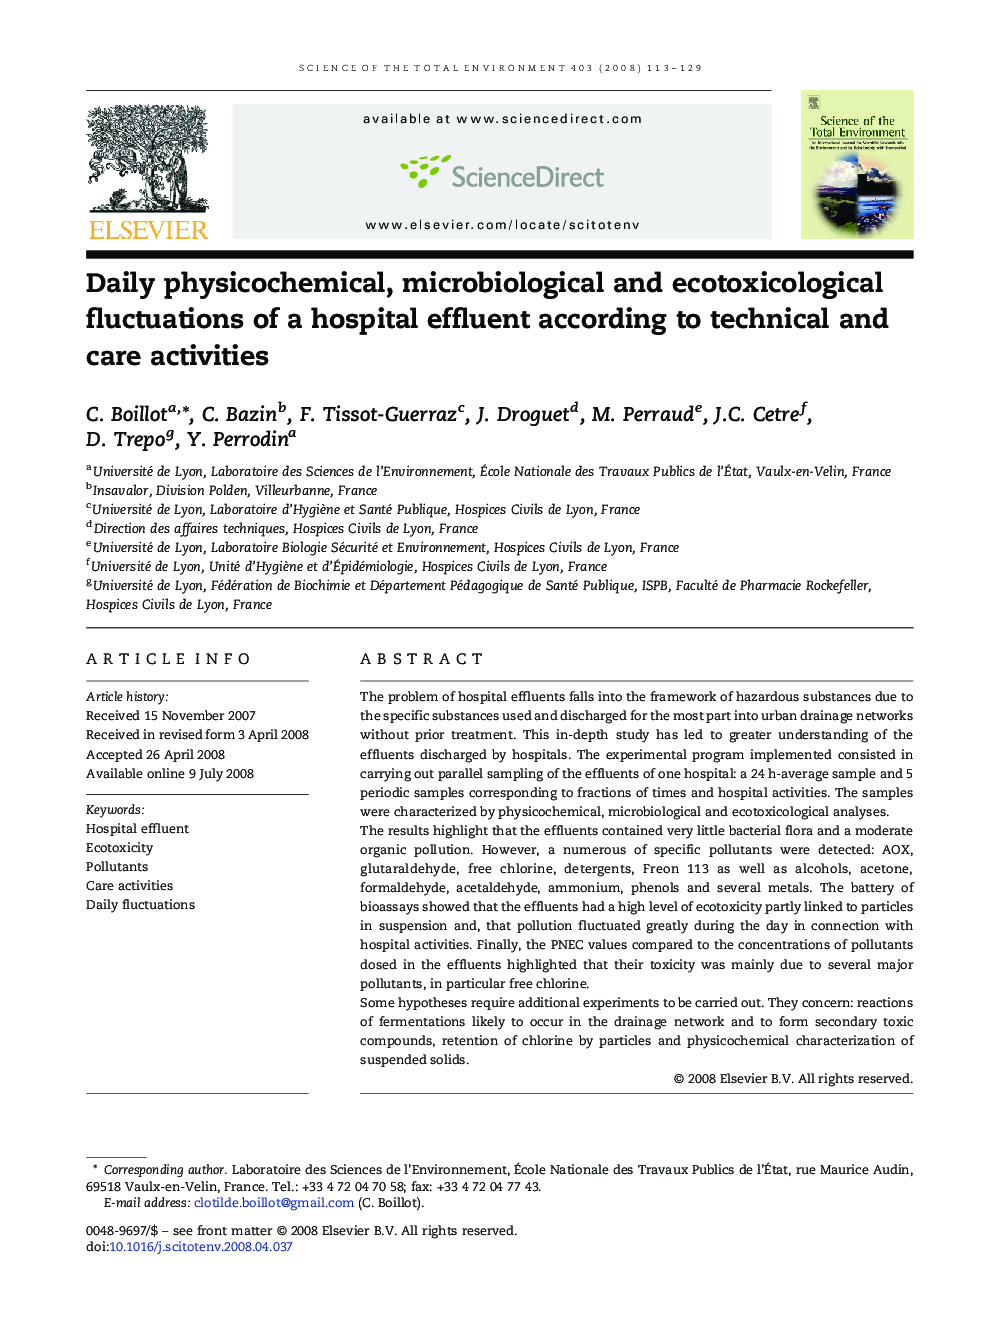 Daily physicochemical, microbiological and ecotoxicological fluctuations of a hospital effluent according to technical and care activities